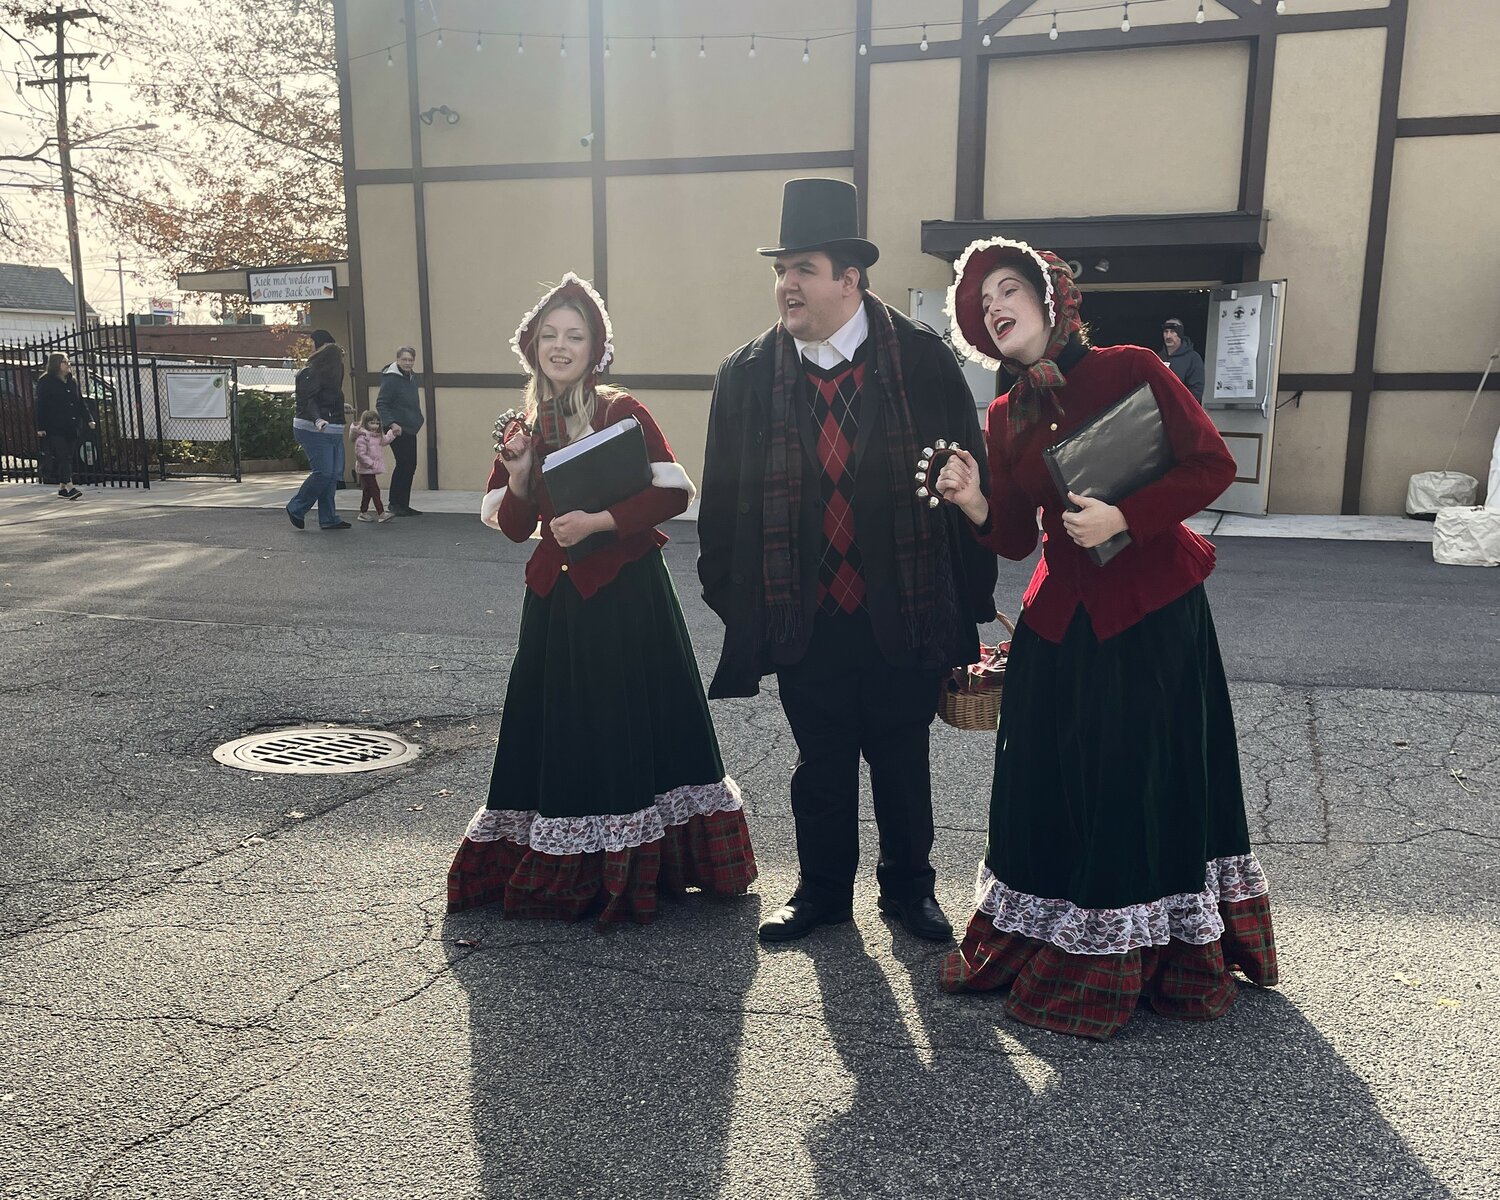 Carolers greeted those who attended the Christkindl Markt, reminiscent of European Christmas markets, at Plattduetsche Park, Restaurant, Catering and Biergarten.